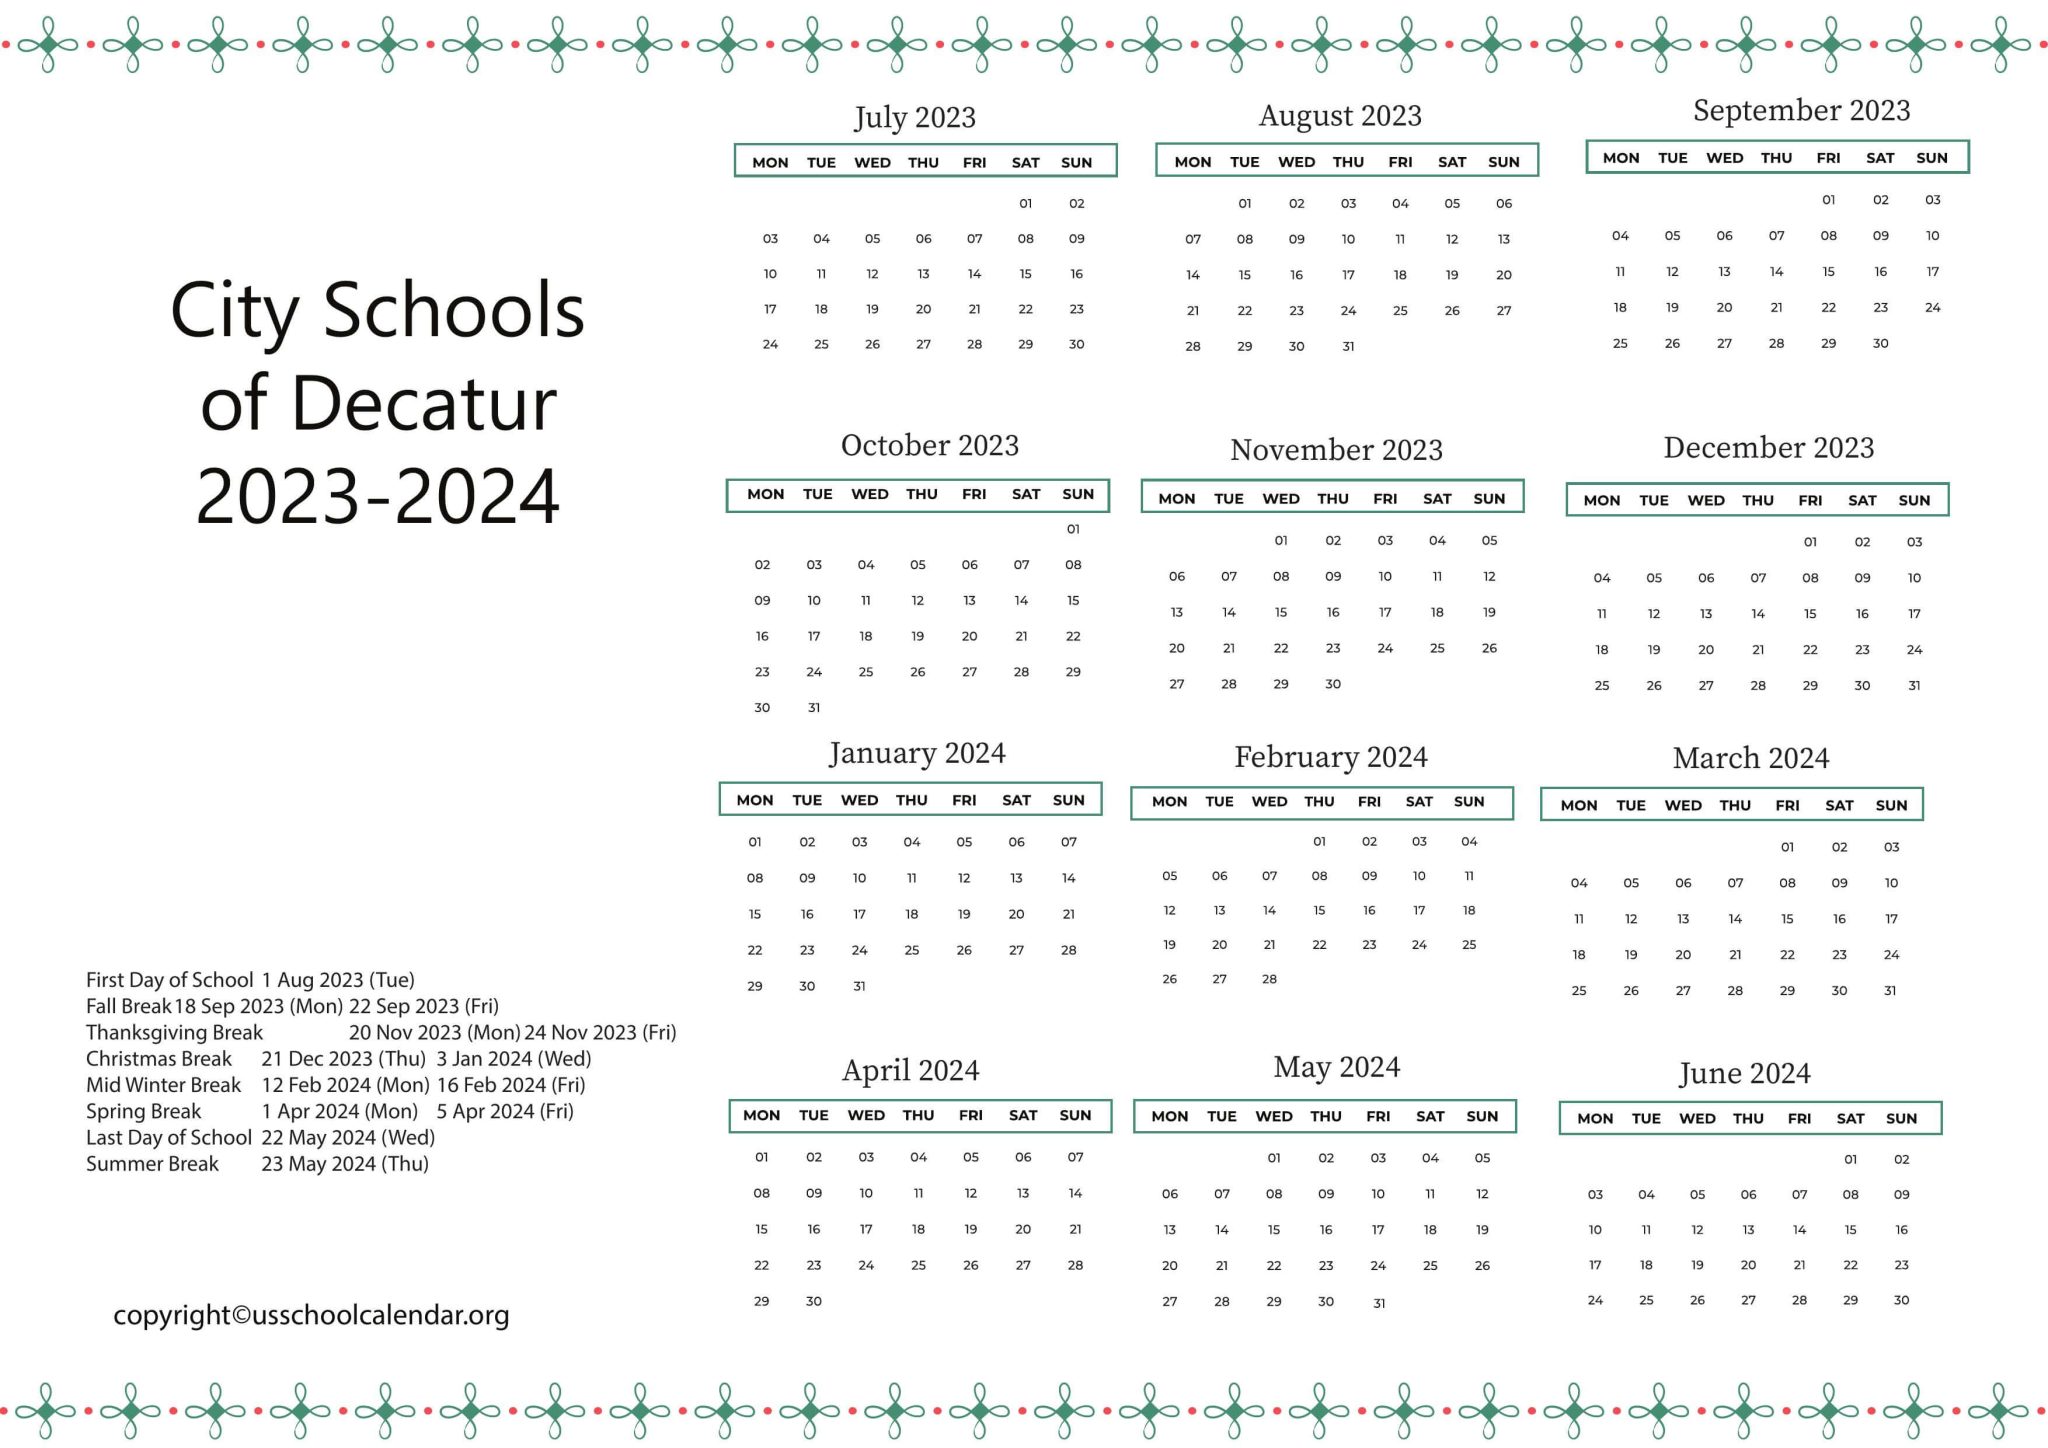 City Schools of Decatur Calendar with Holidays 2023 2024